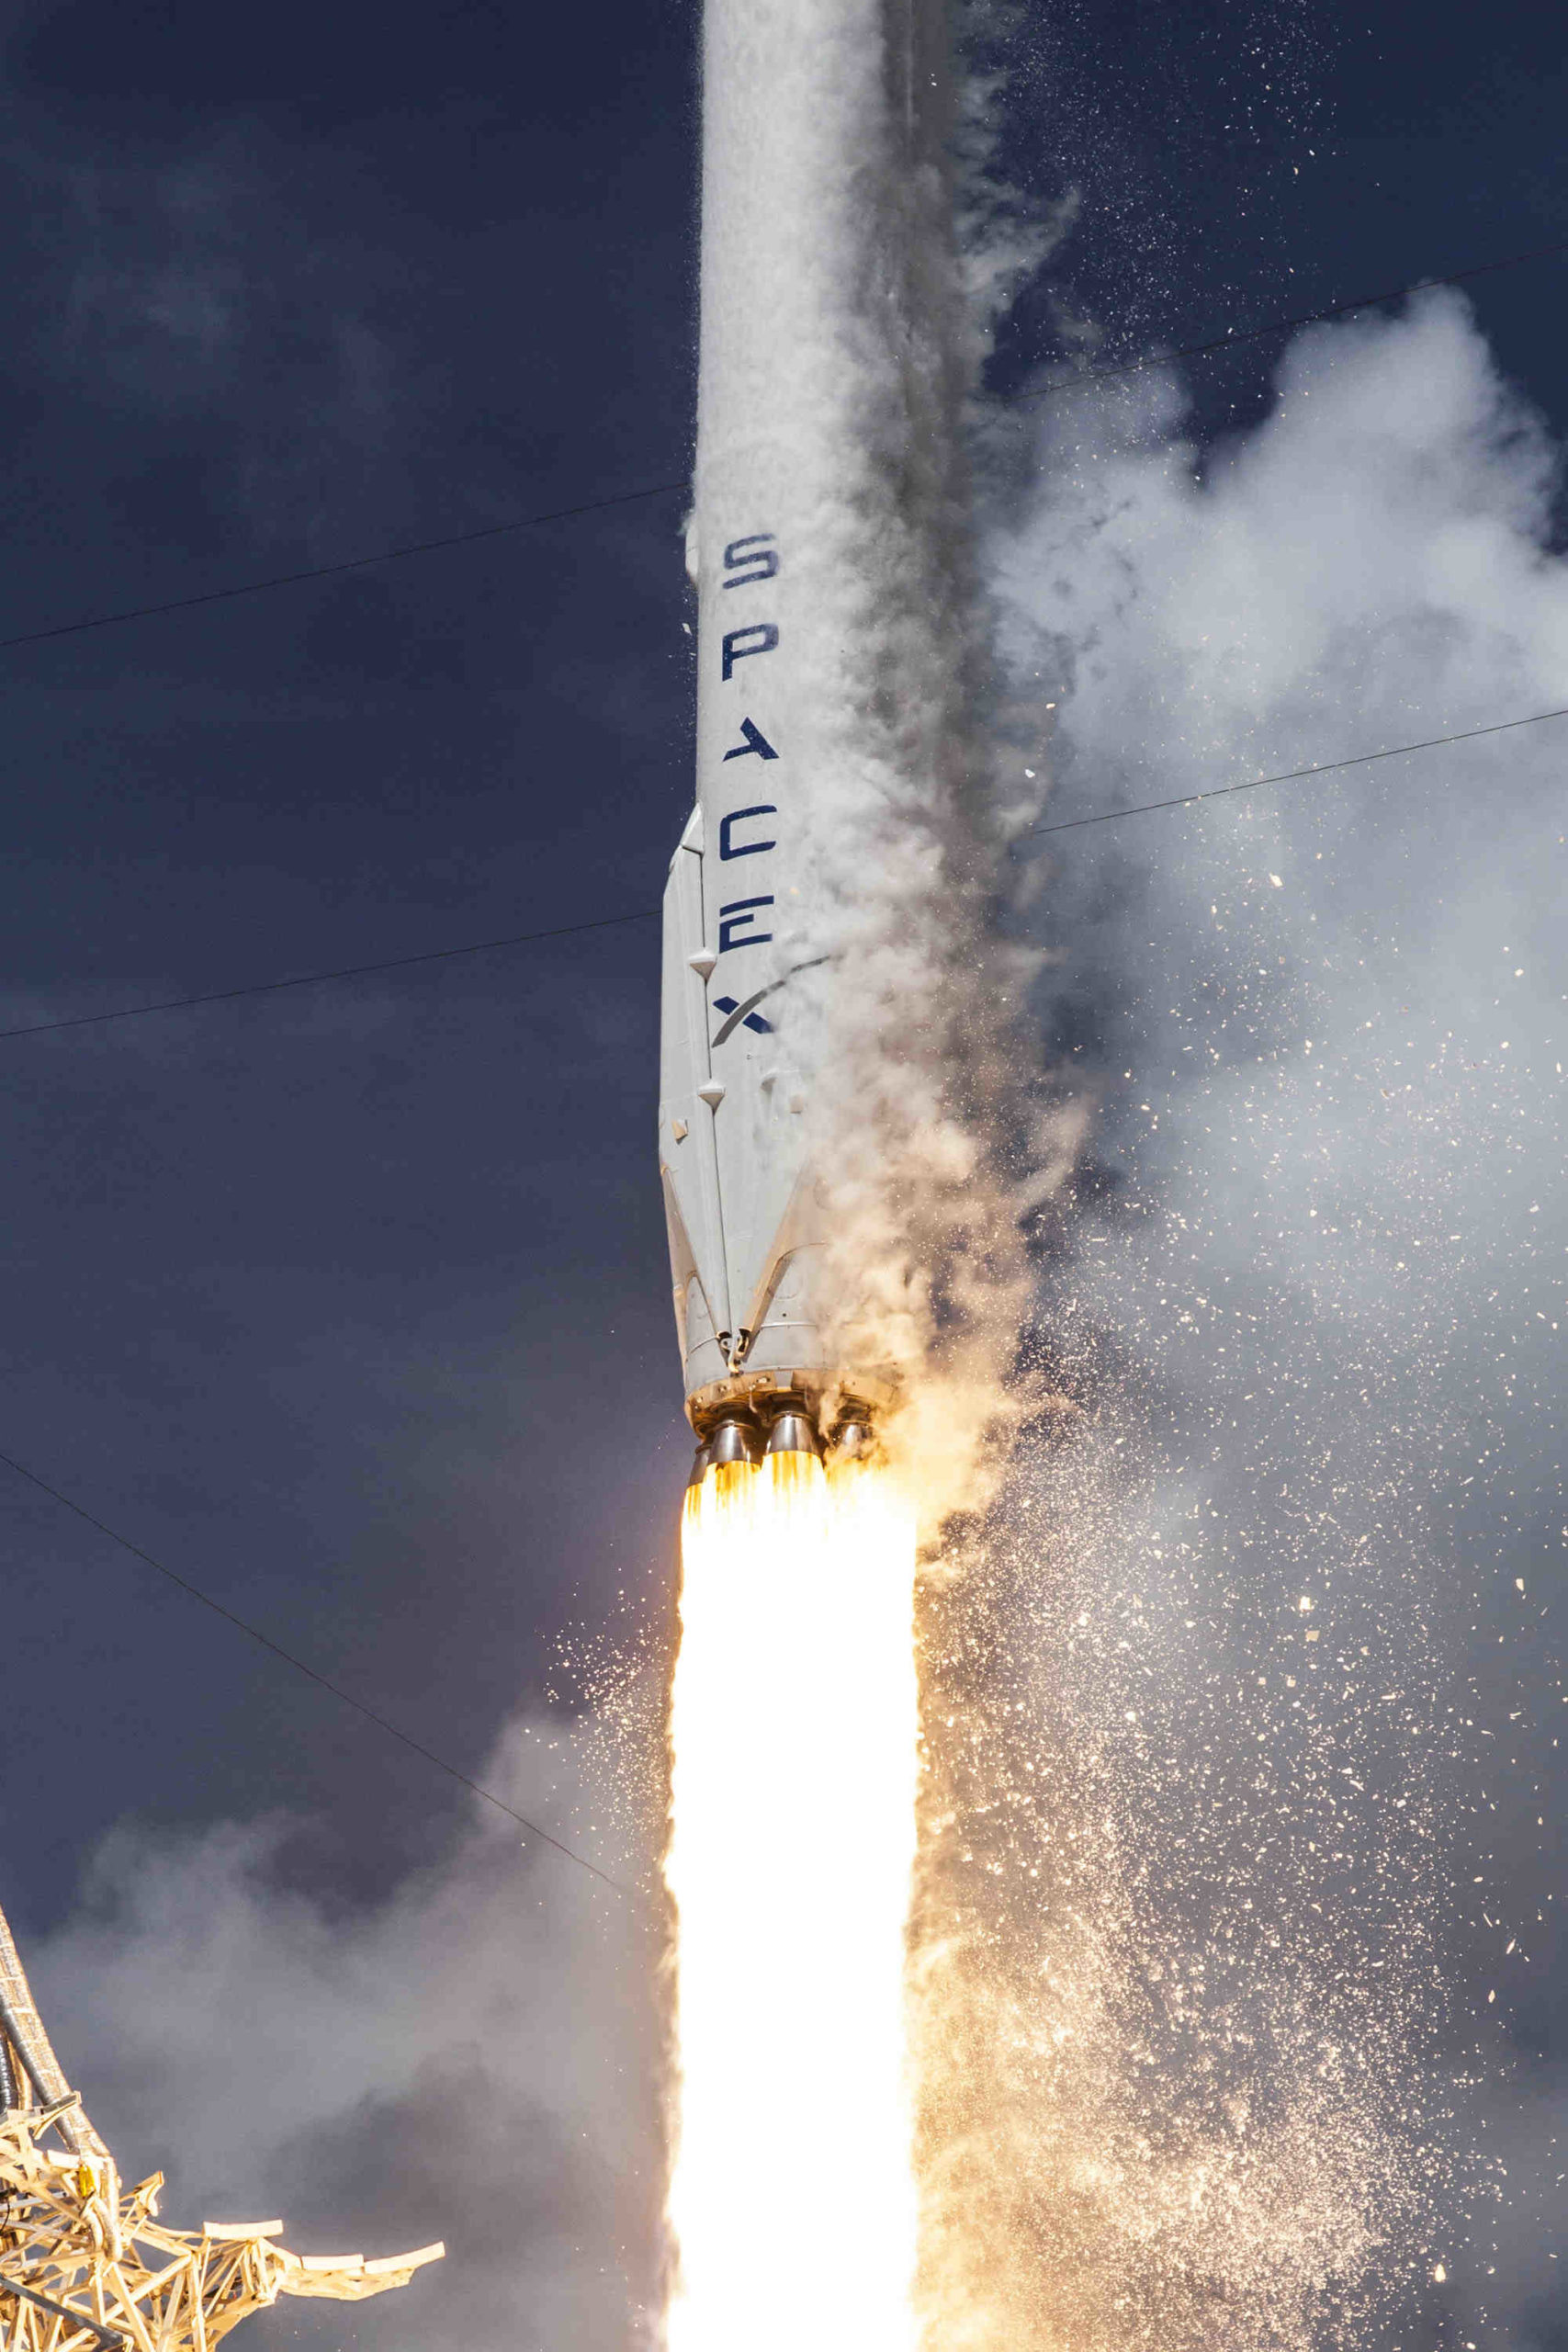 Who owns SpaceX?